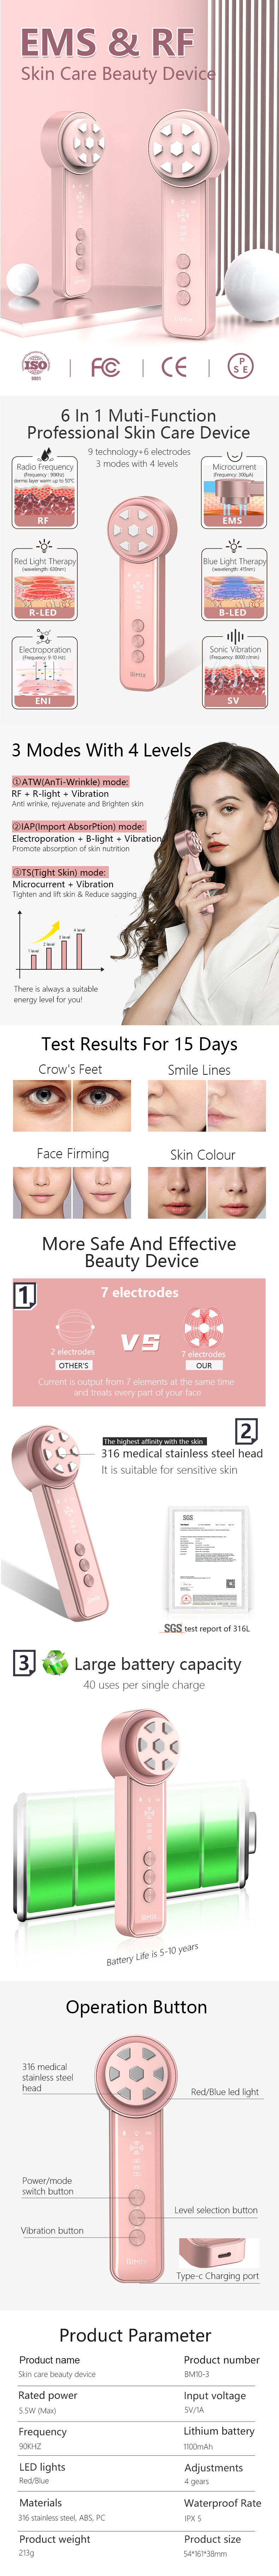 Ems Skin Care Device Supplier